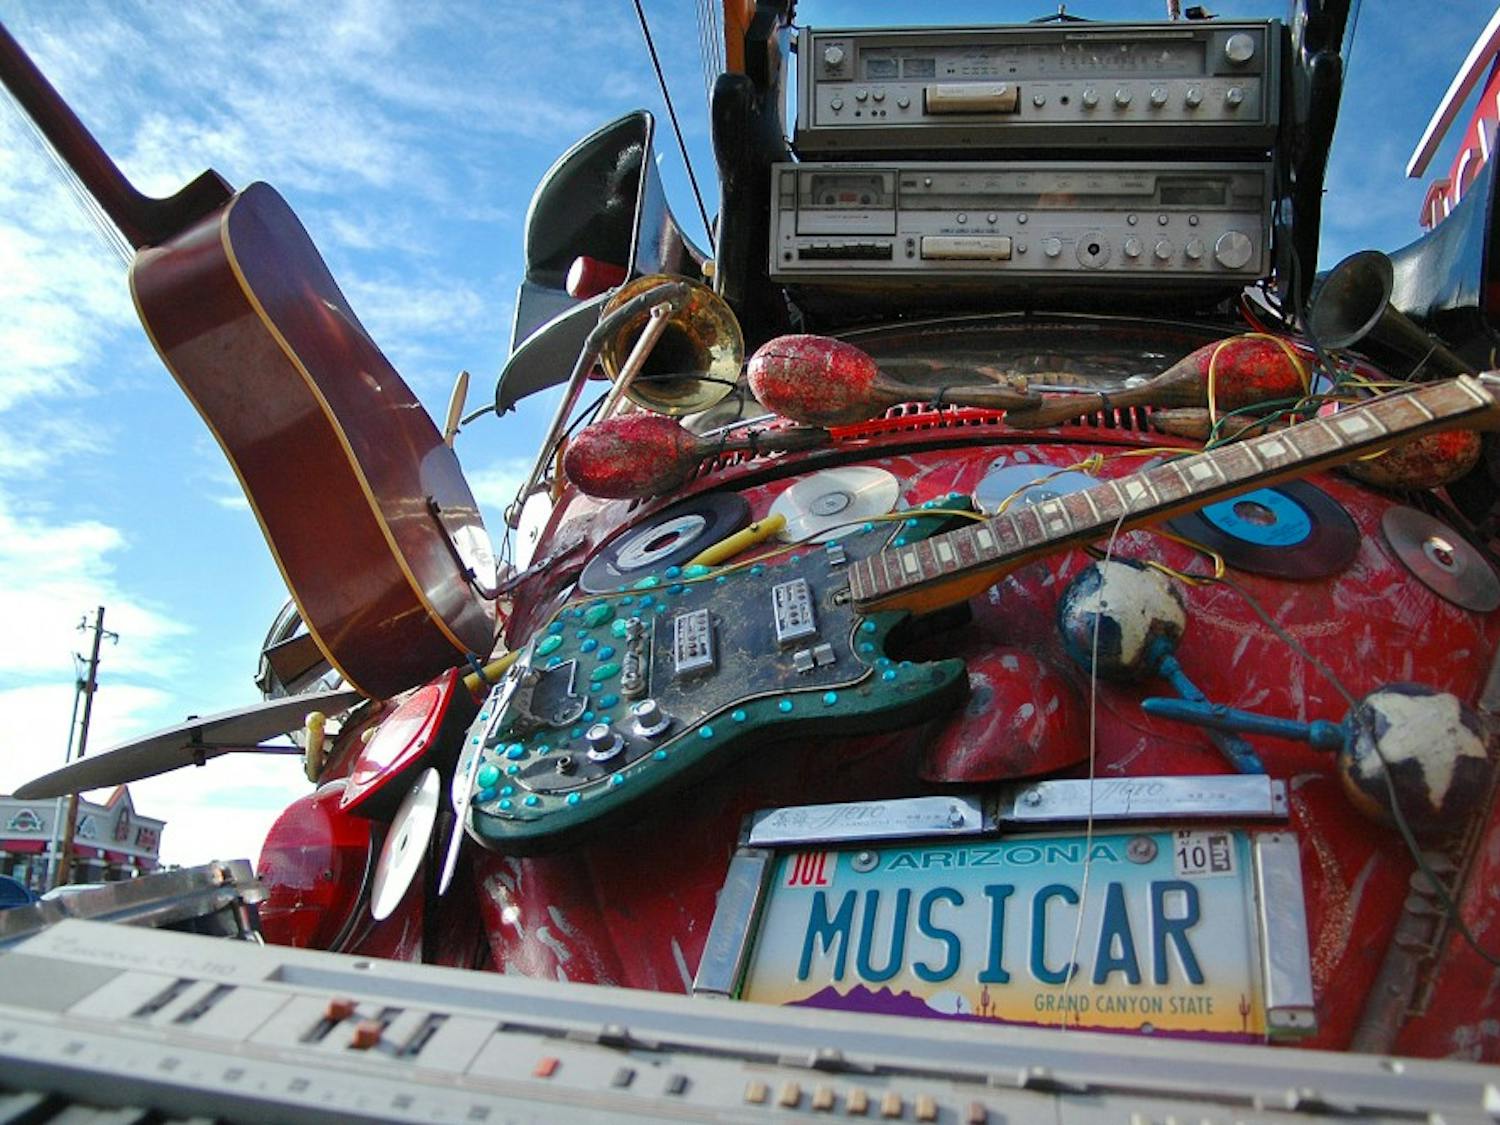 	Hunter Mann is the maker of “musicar” and displayed his car art outside The Guild on Sunday. Mann is on the Board of Directors for Art Car World Museum.